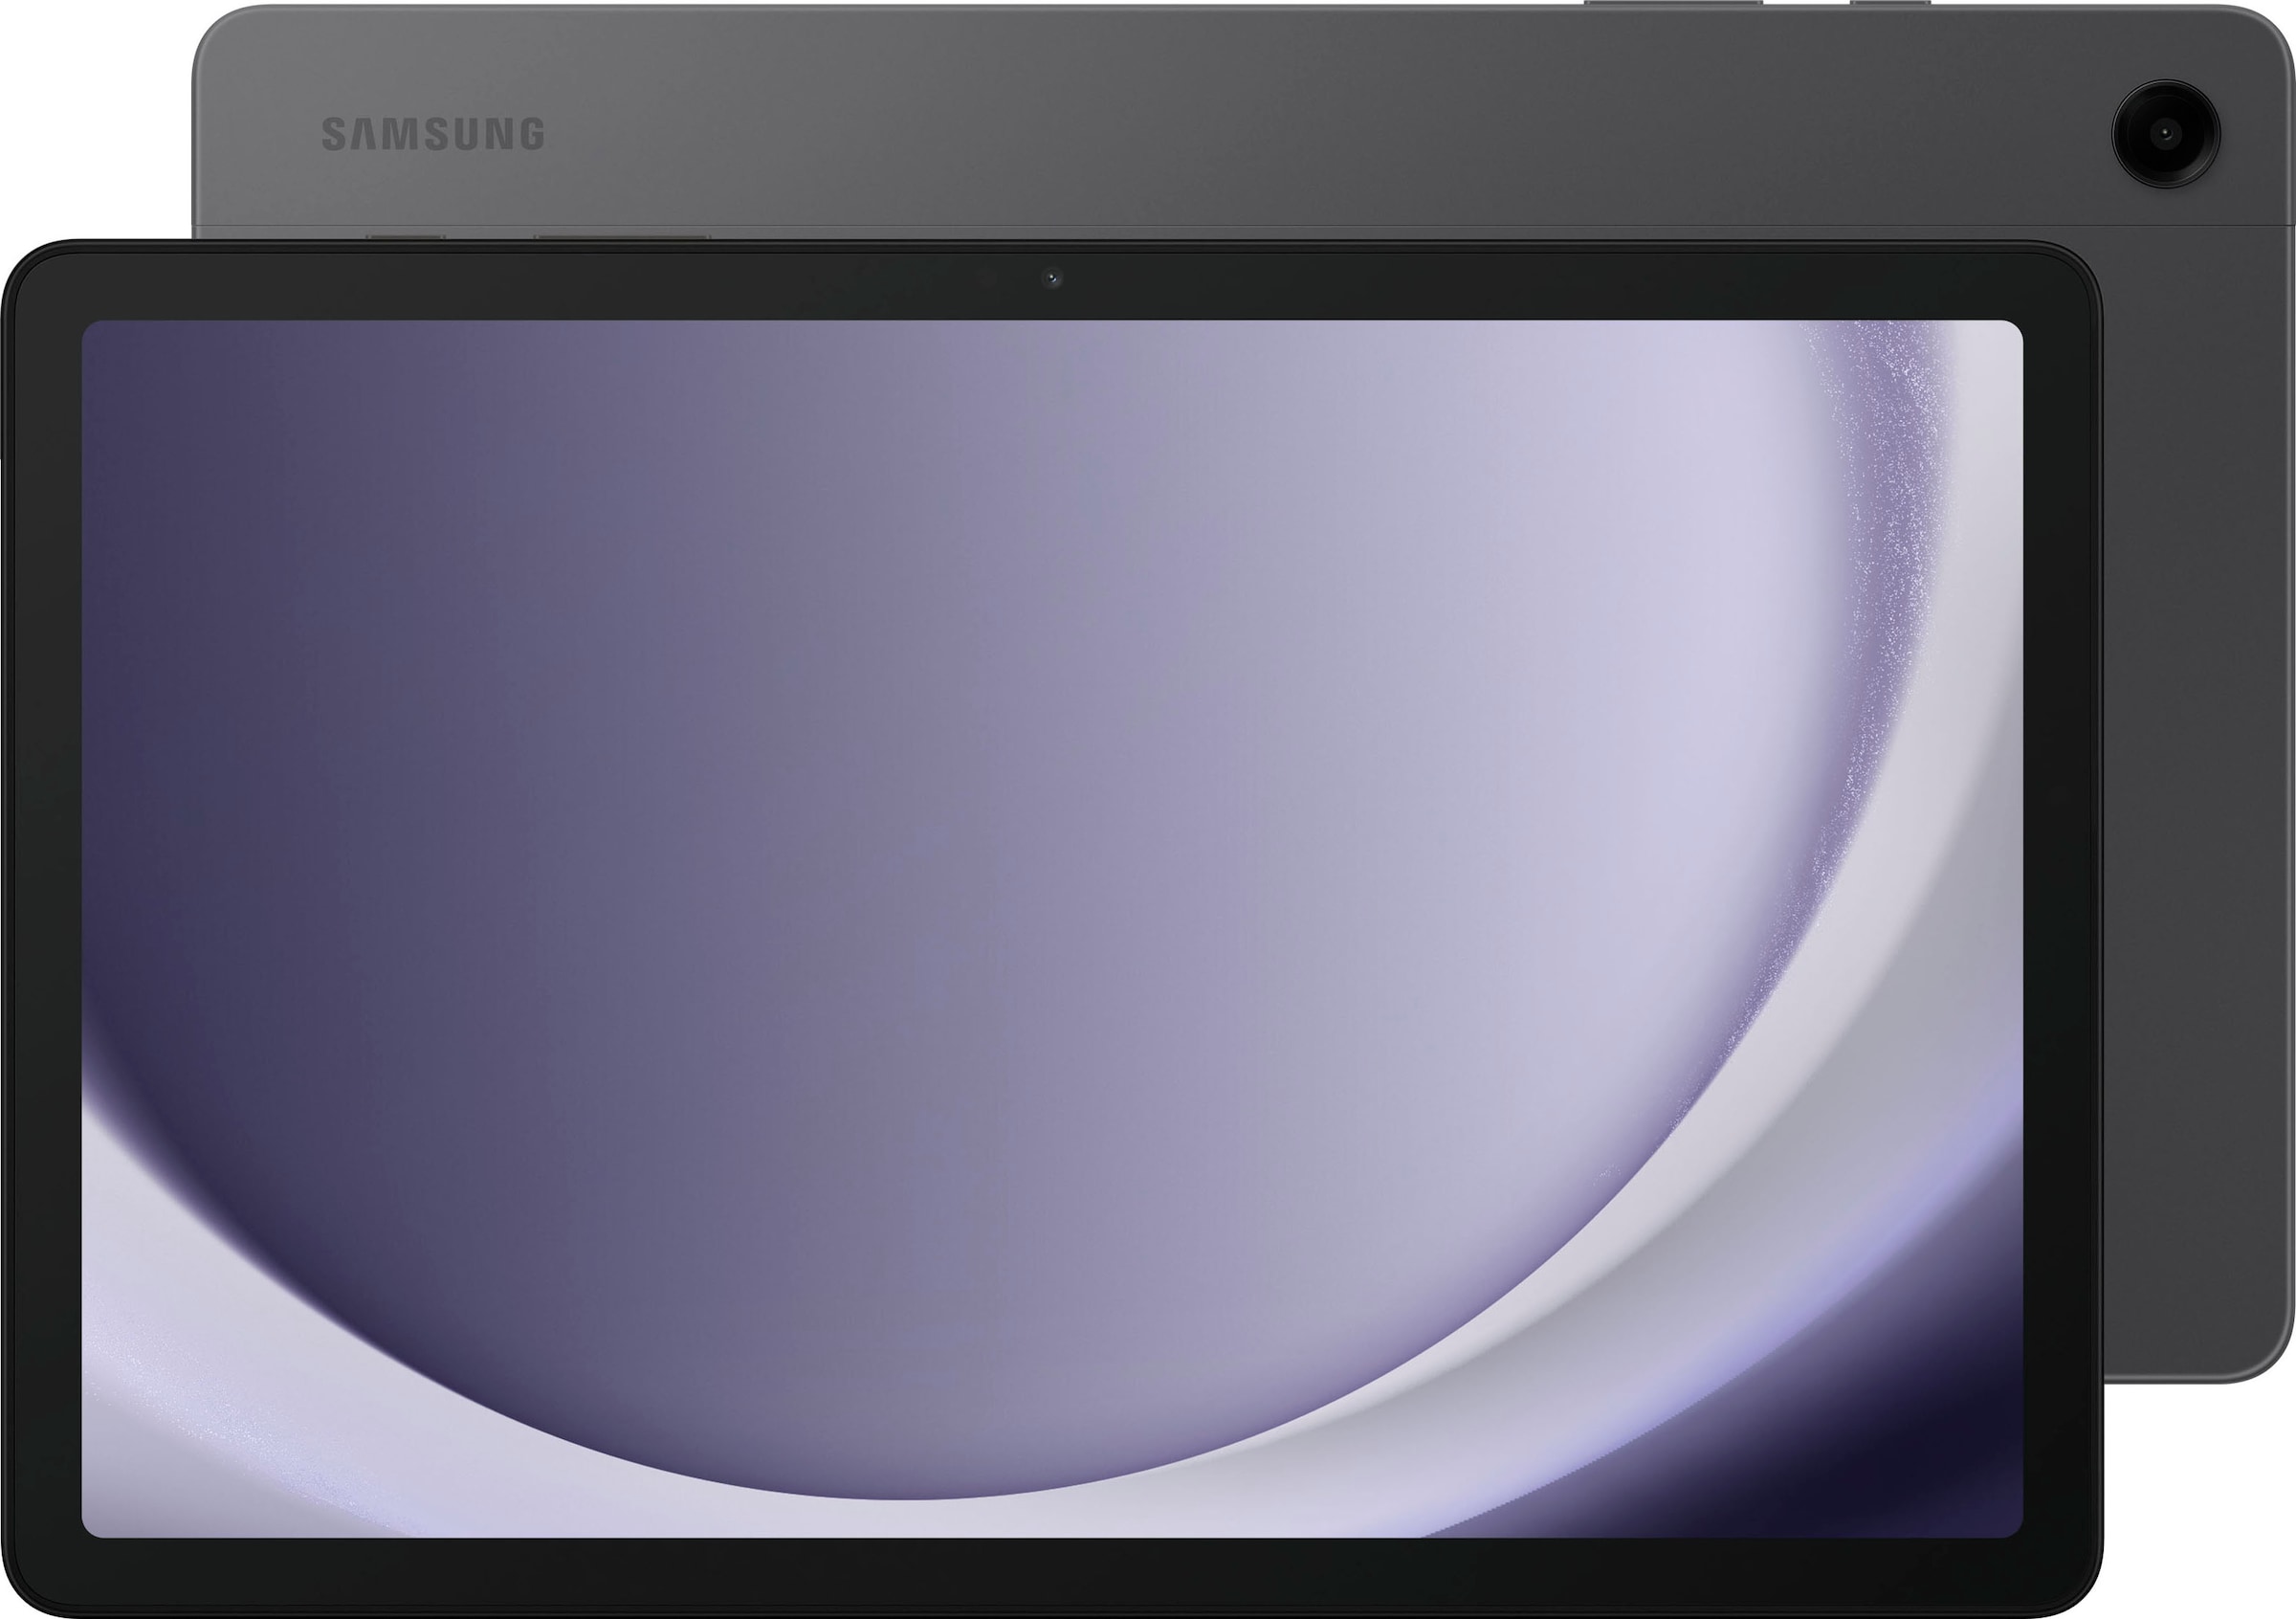 Samsung Tablet »Galaxy Tab A9+«, (Android,One UI,Knox)